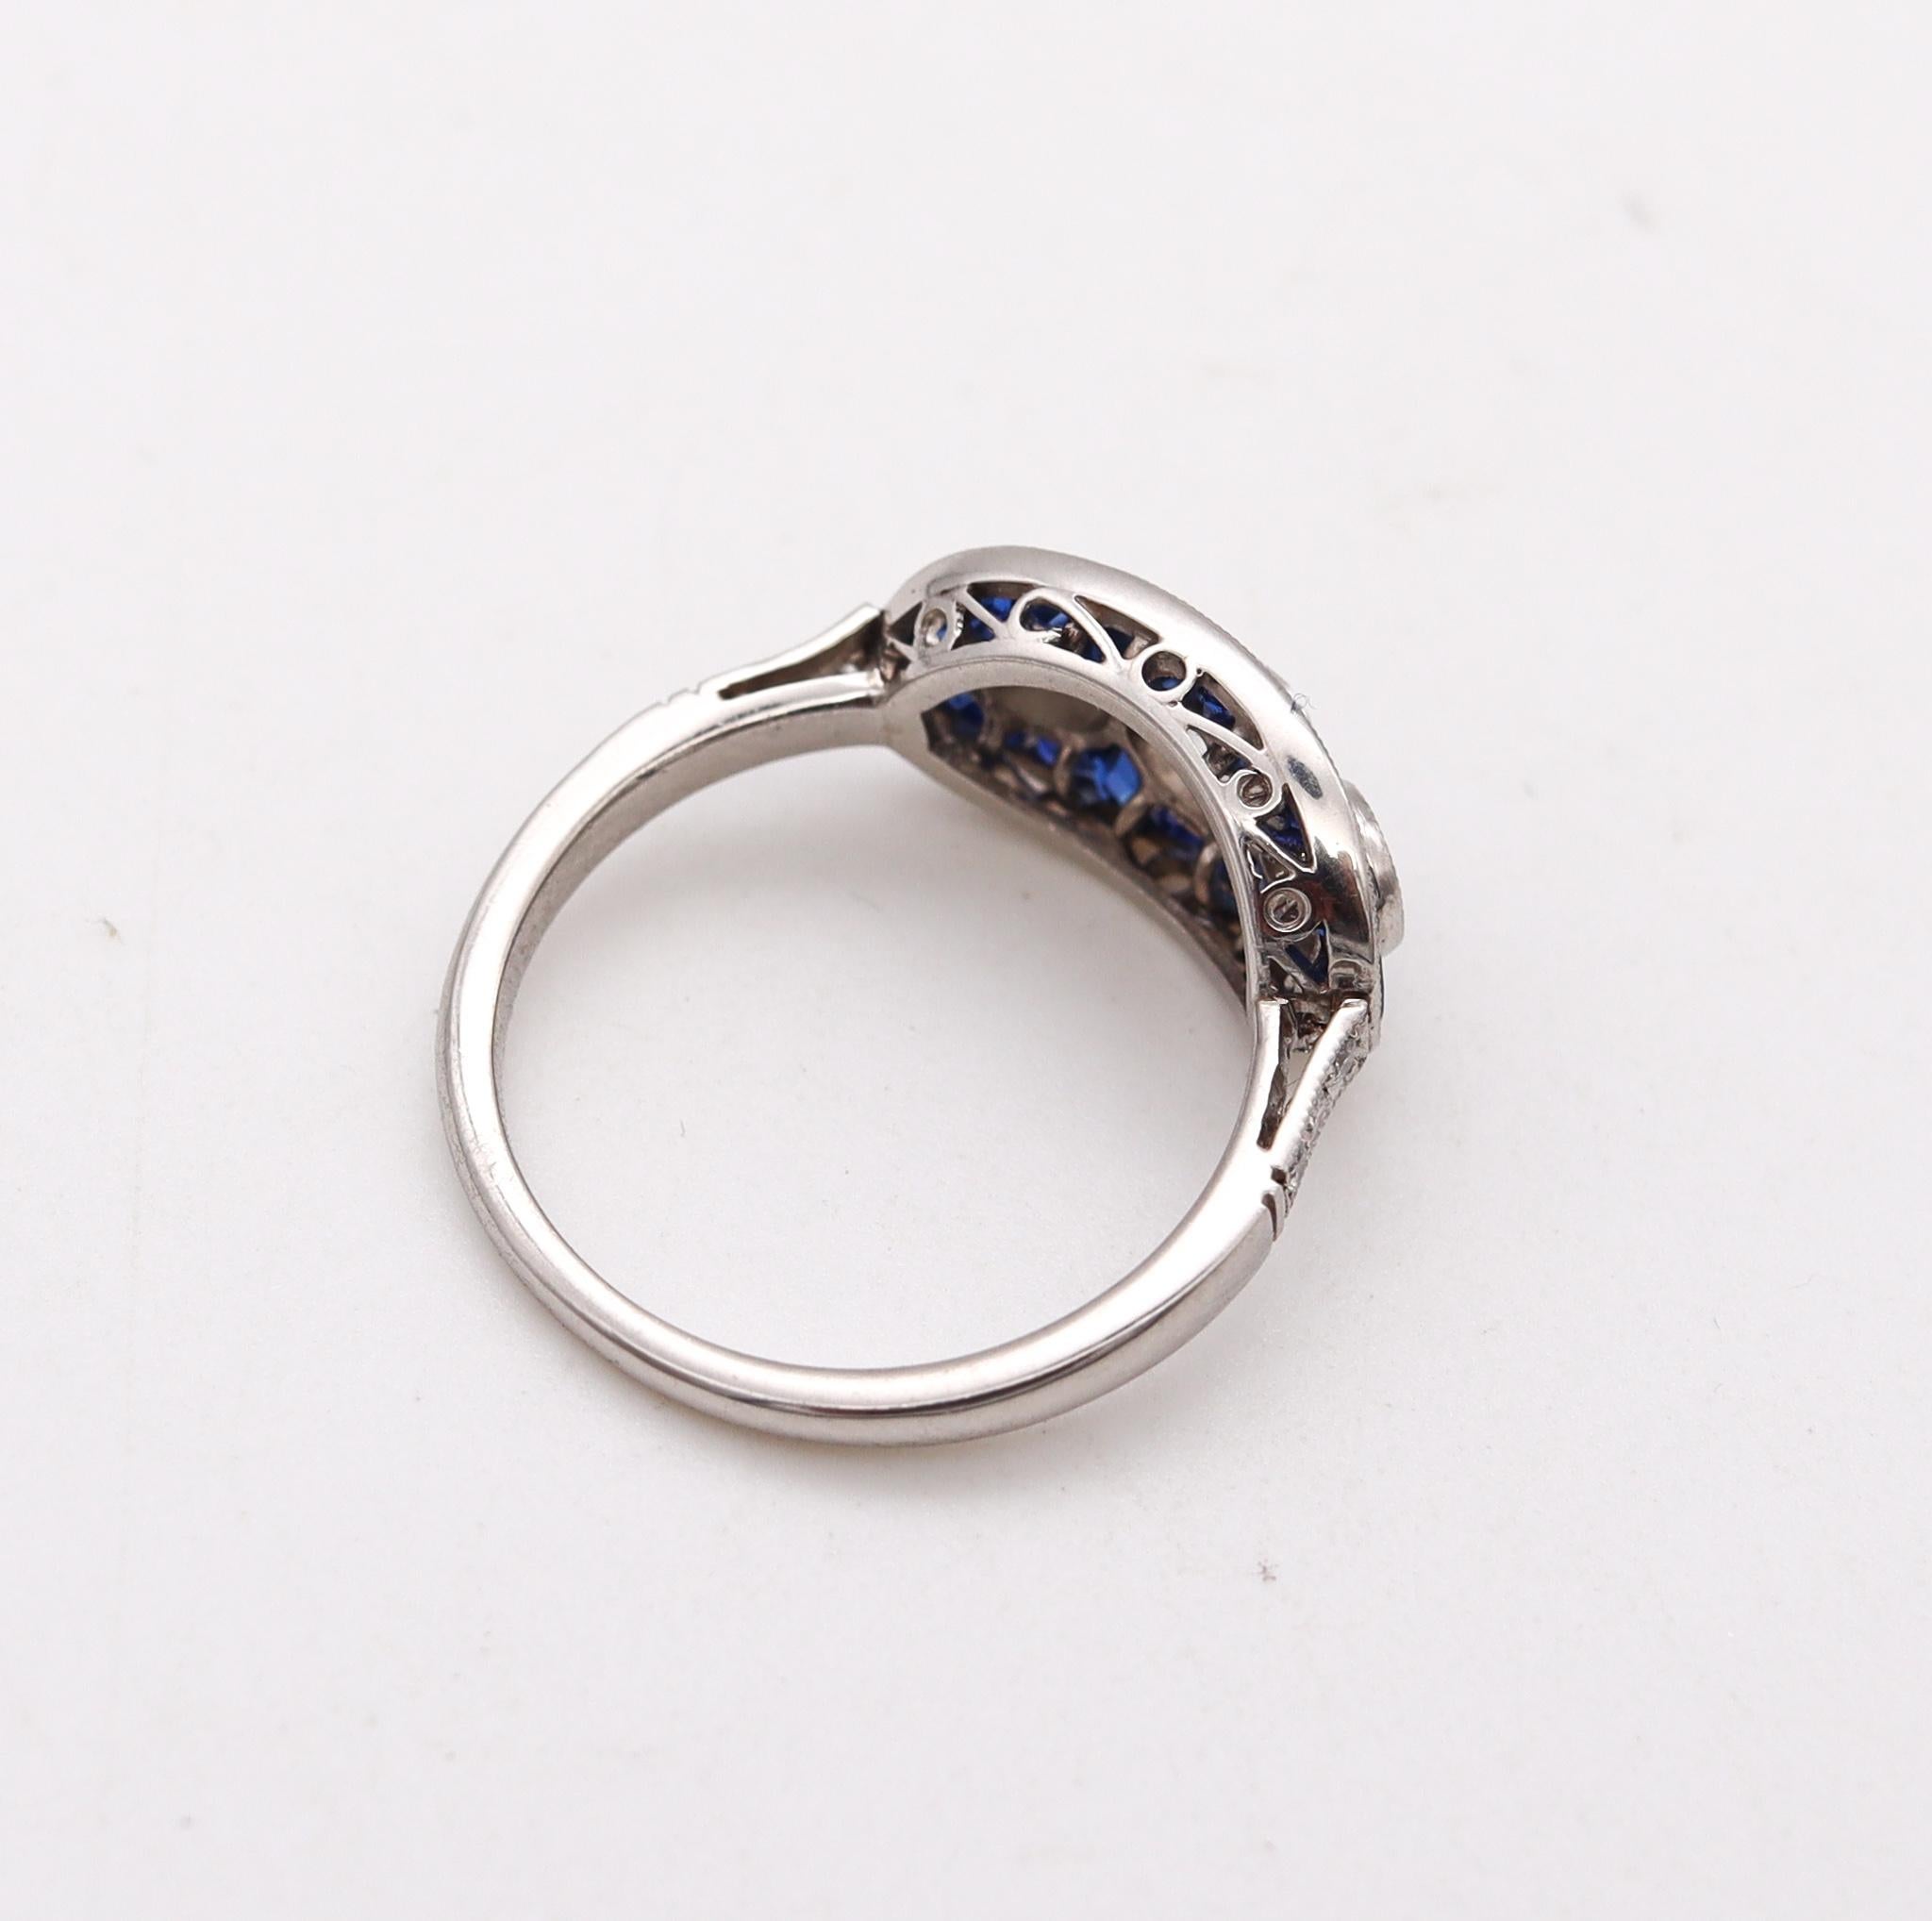 Women's Art Deco 1930 Gem Set Ring in Platinum with 3.06 Cts in Diamonds and Sapphires For Sale